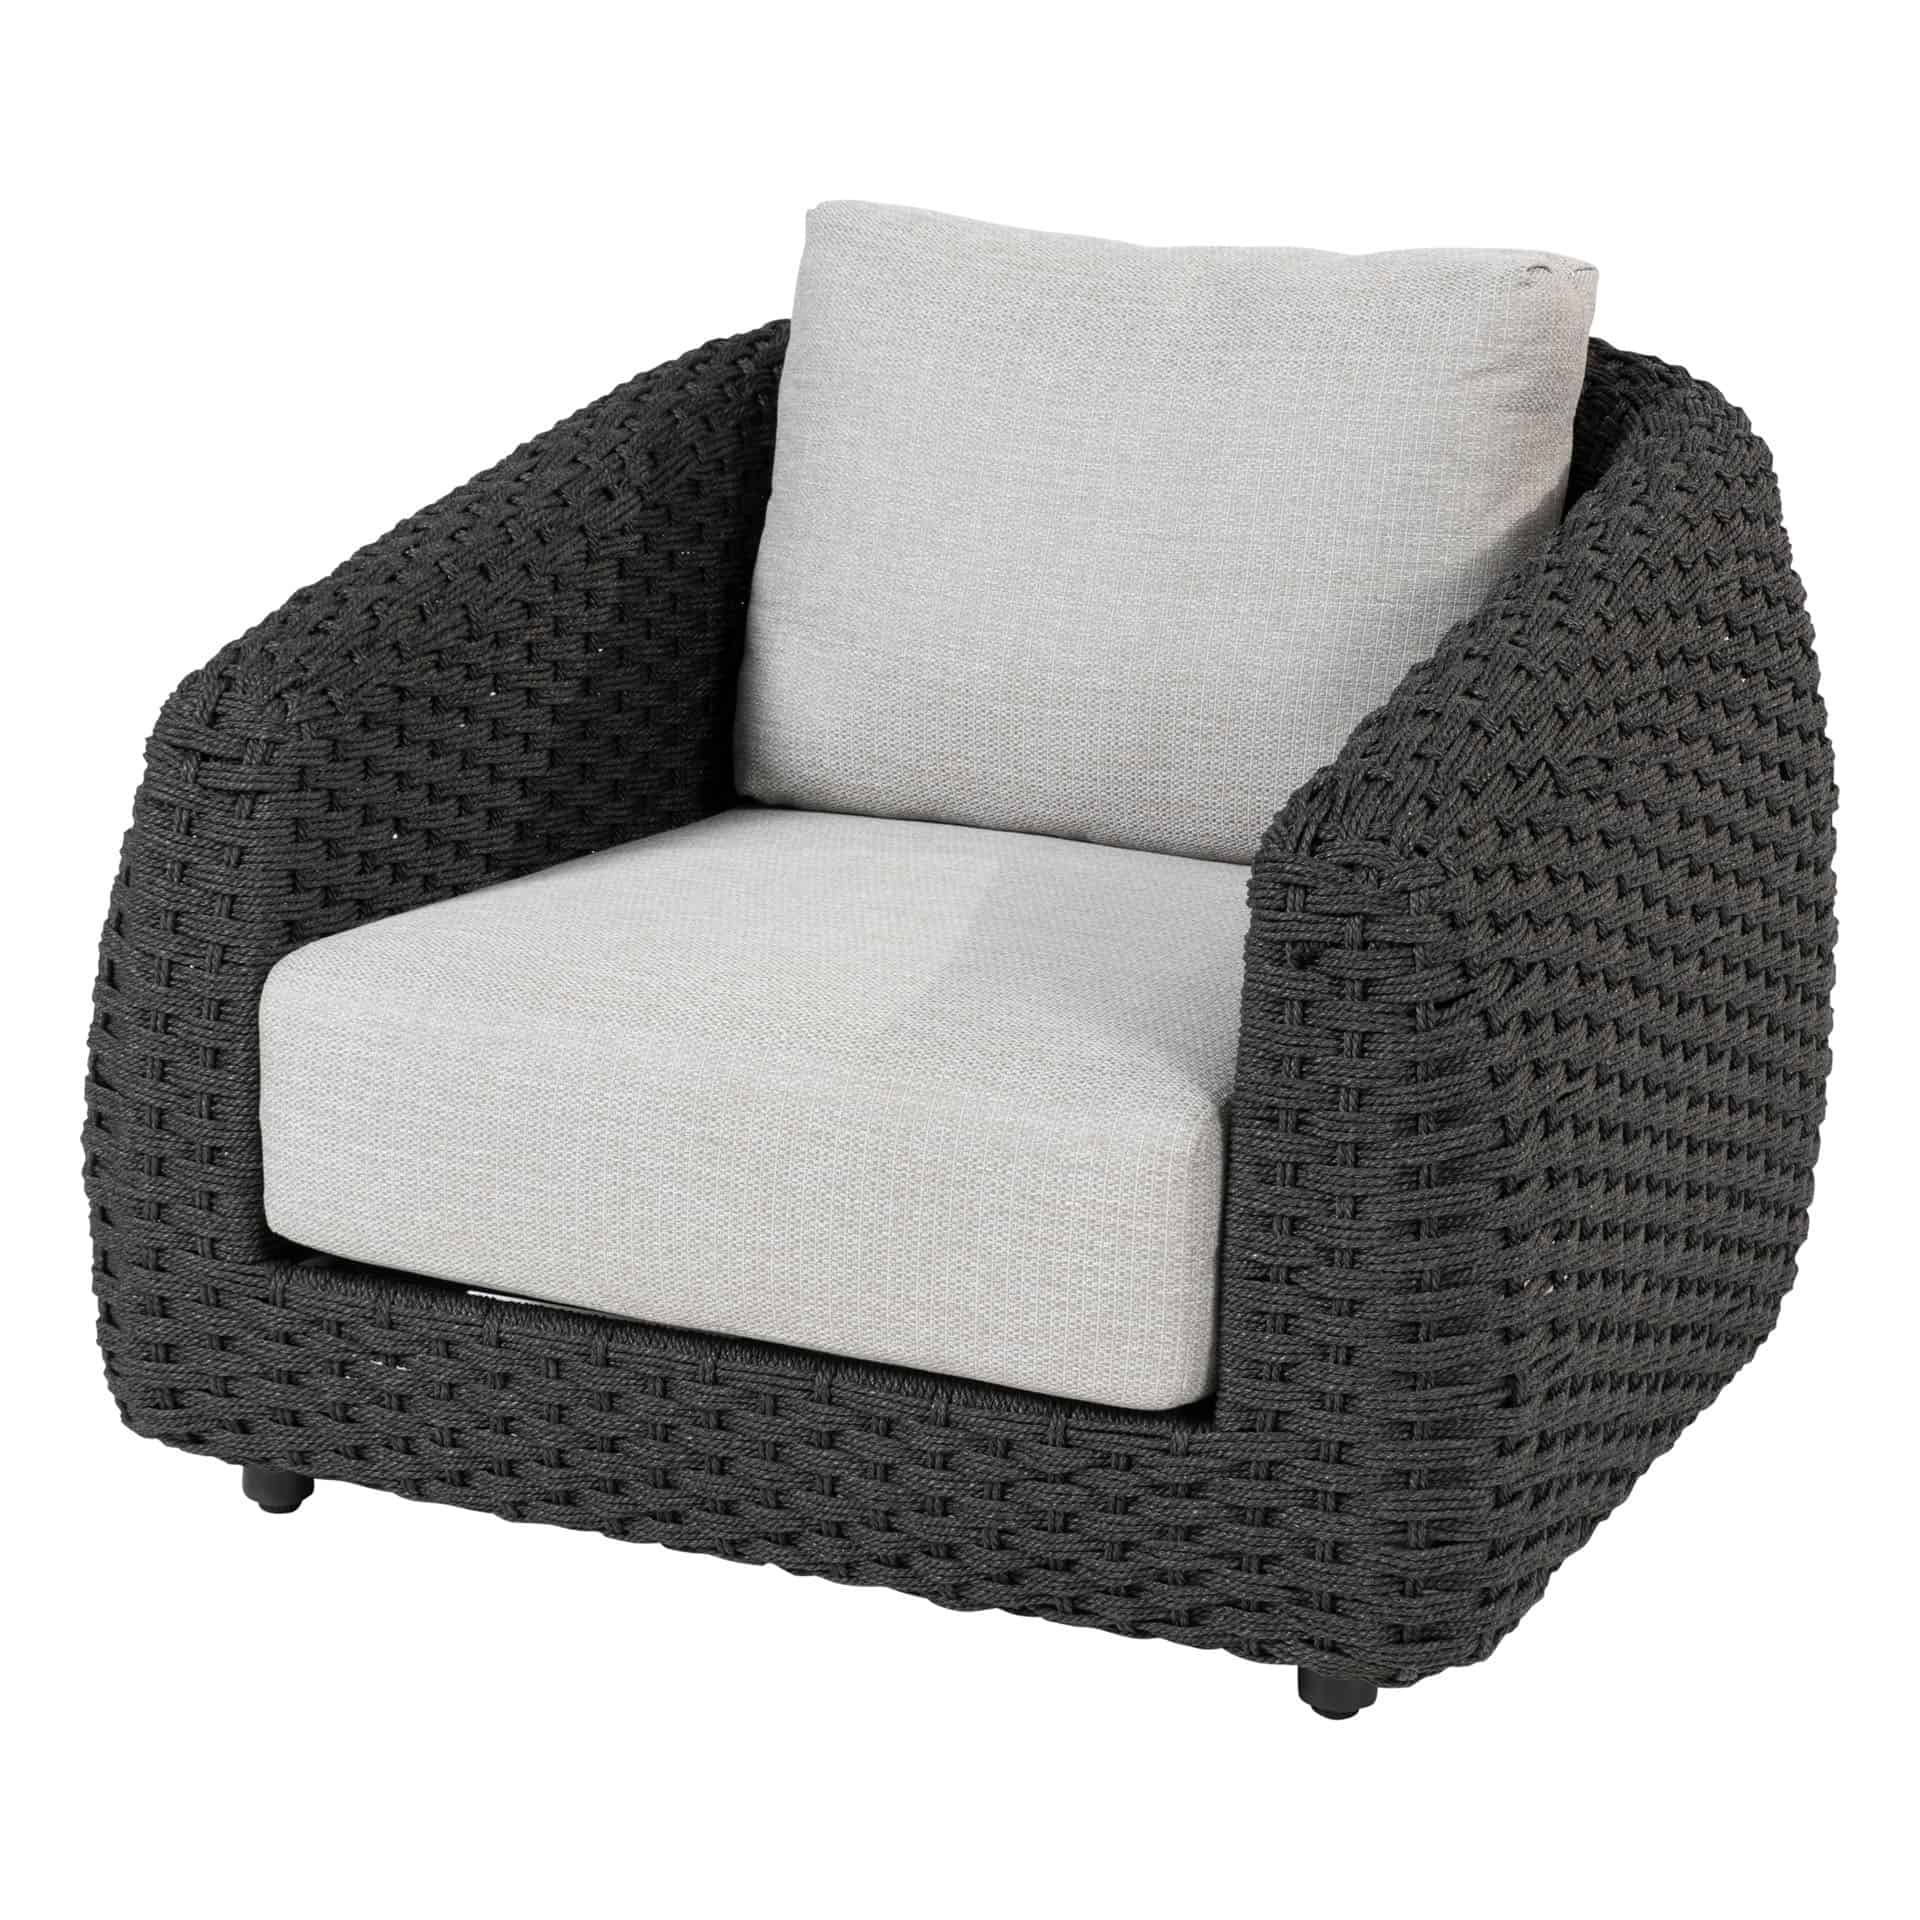 213948_-Saint-Tropez-living-chair-anthracite-with-2-cushions-1